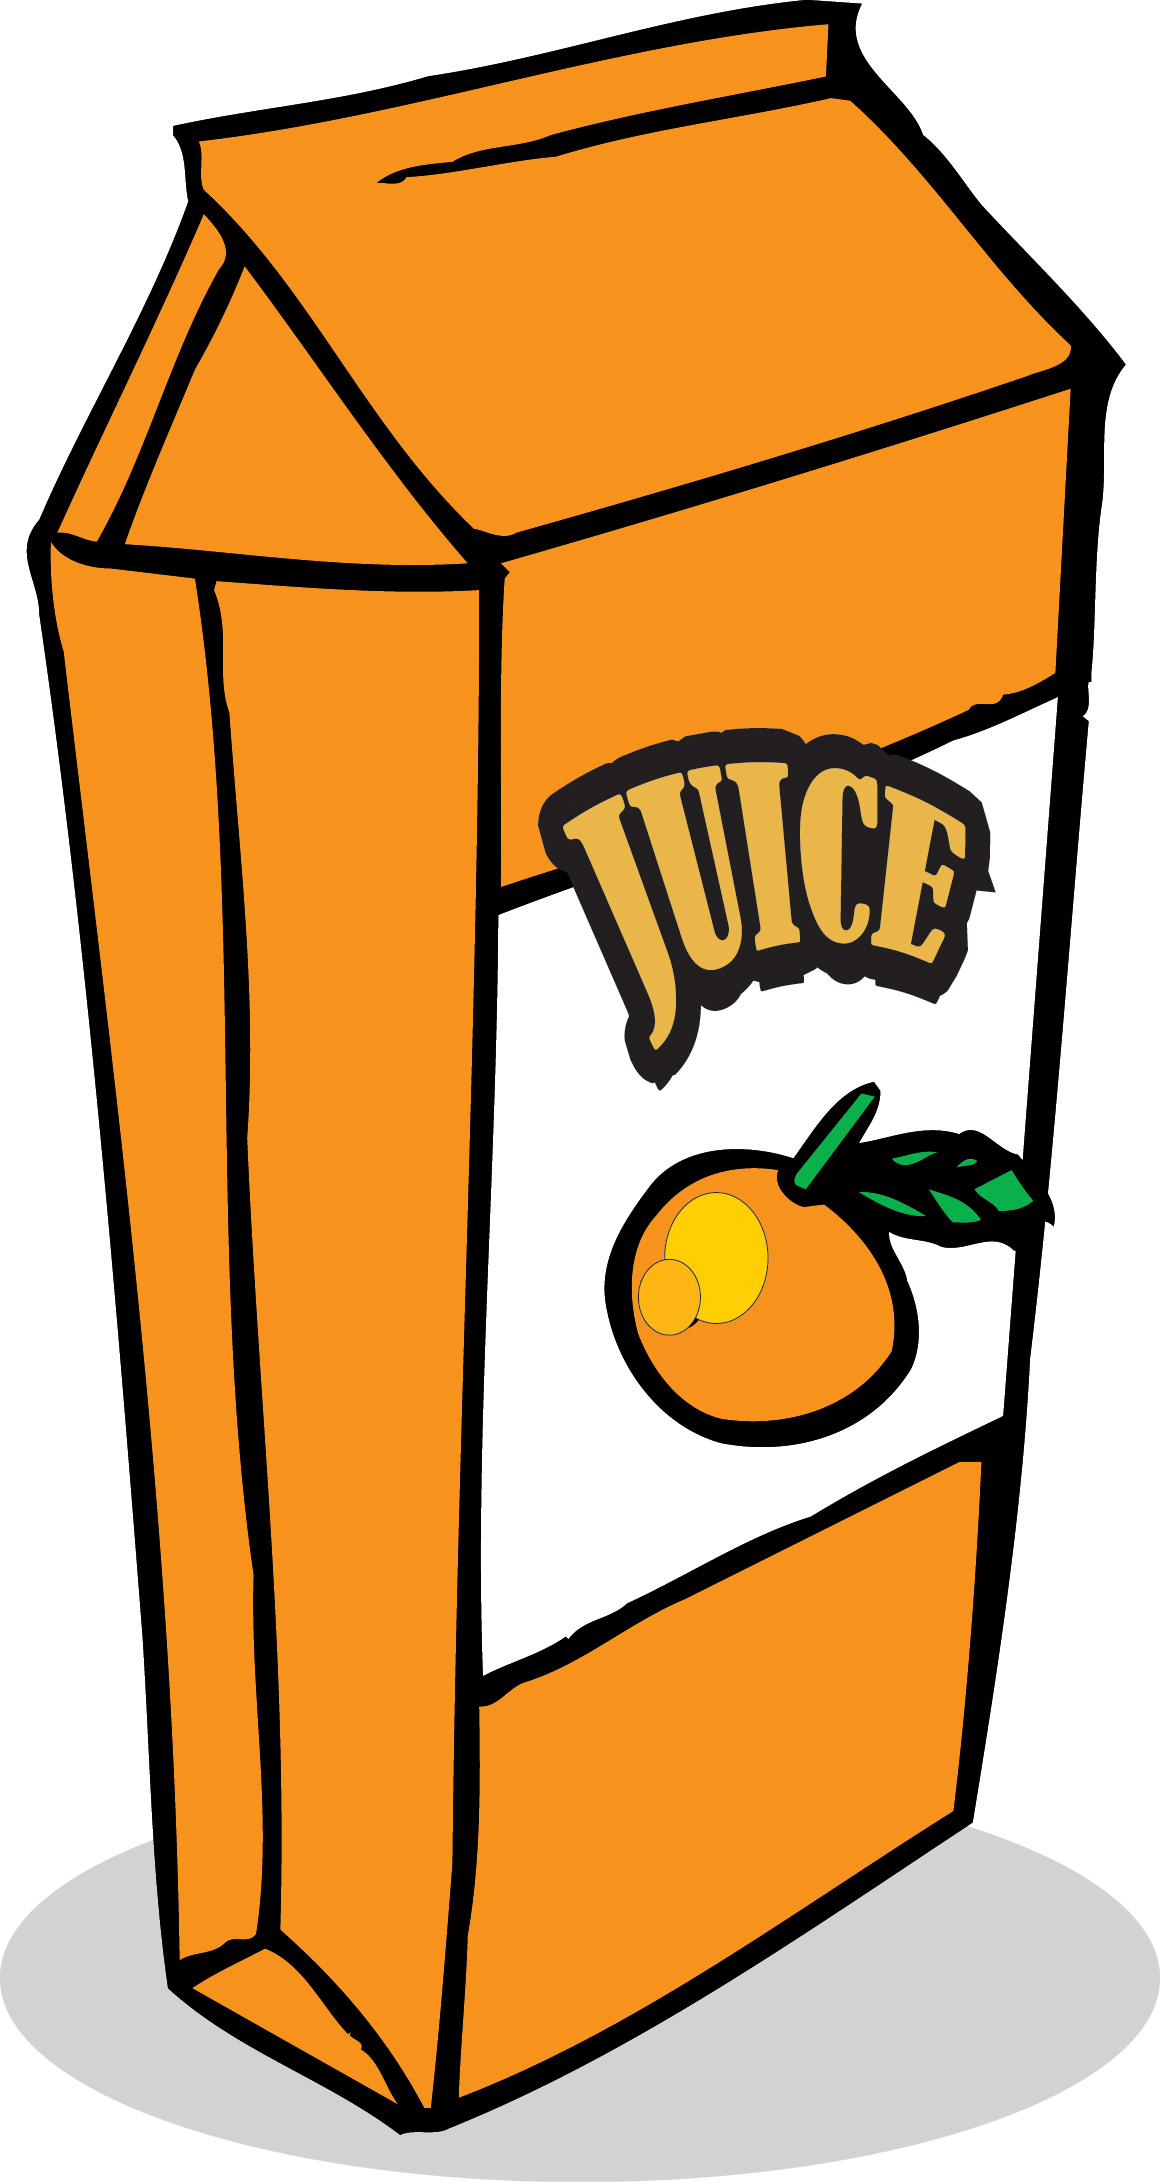 juice clipart free download - photo #23